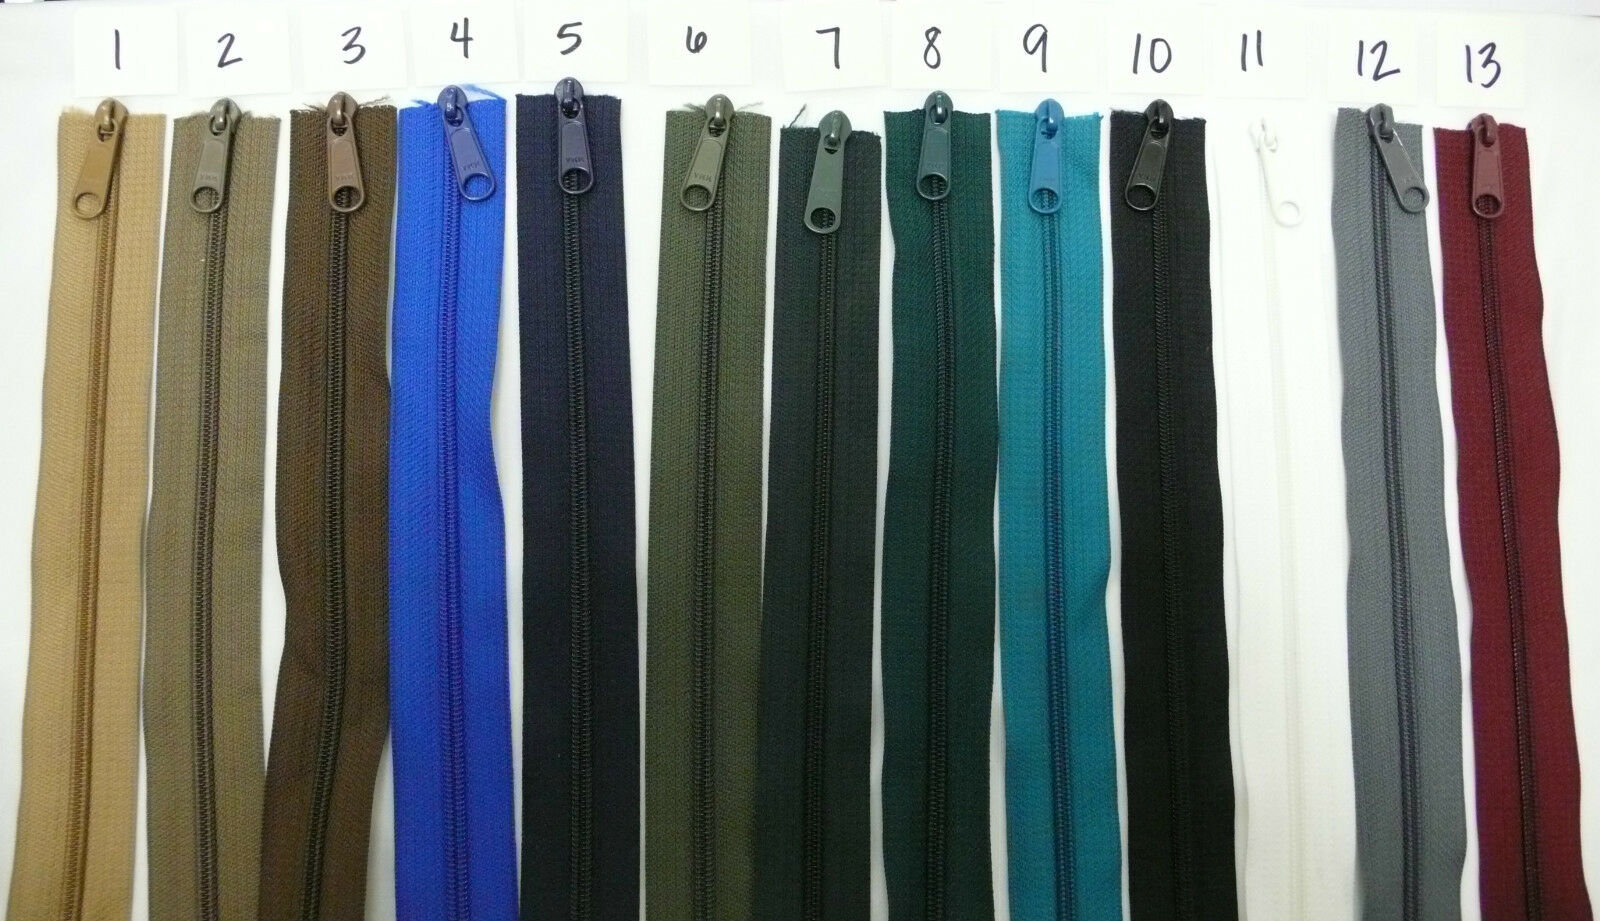 NYLON ZIPPER BUY BY THE YARD WITH MATCHING YKK PULLS .45 VARIOUS COLORS